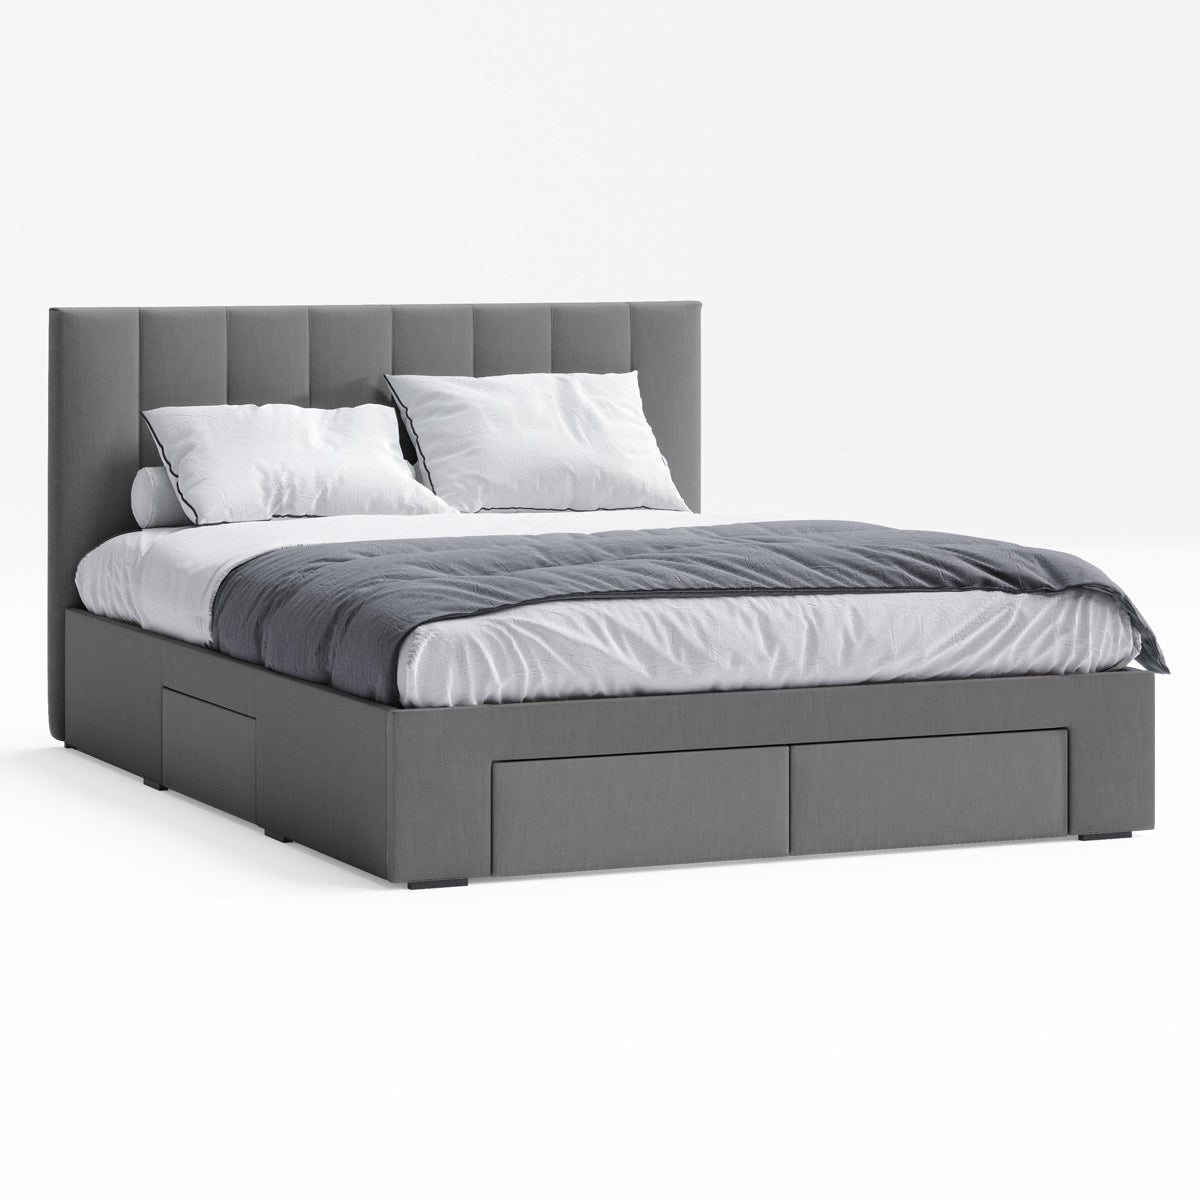 Ormond Storage Bed Frame with Four Extra Large Drawers (Charcoal Fabric)